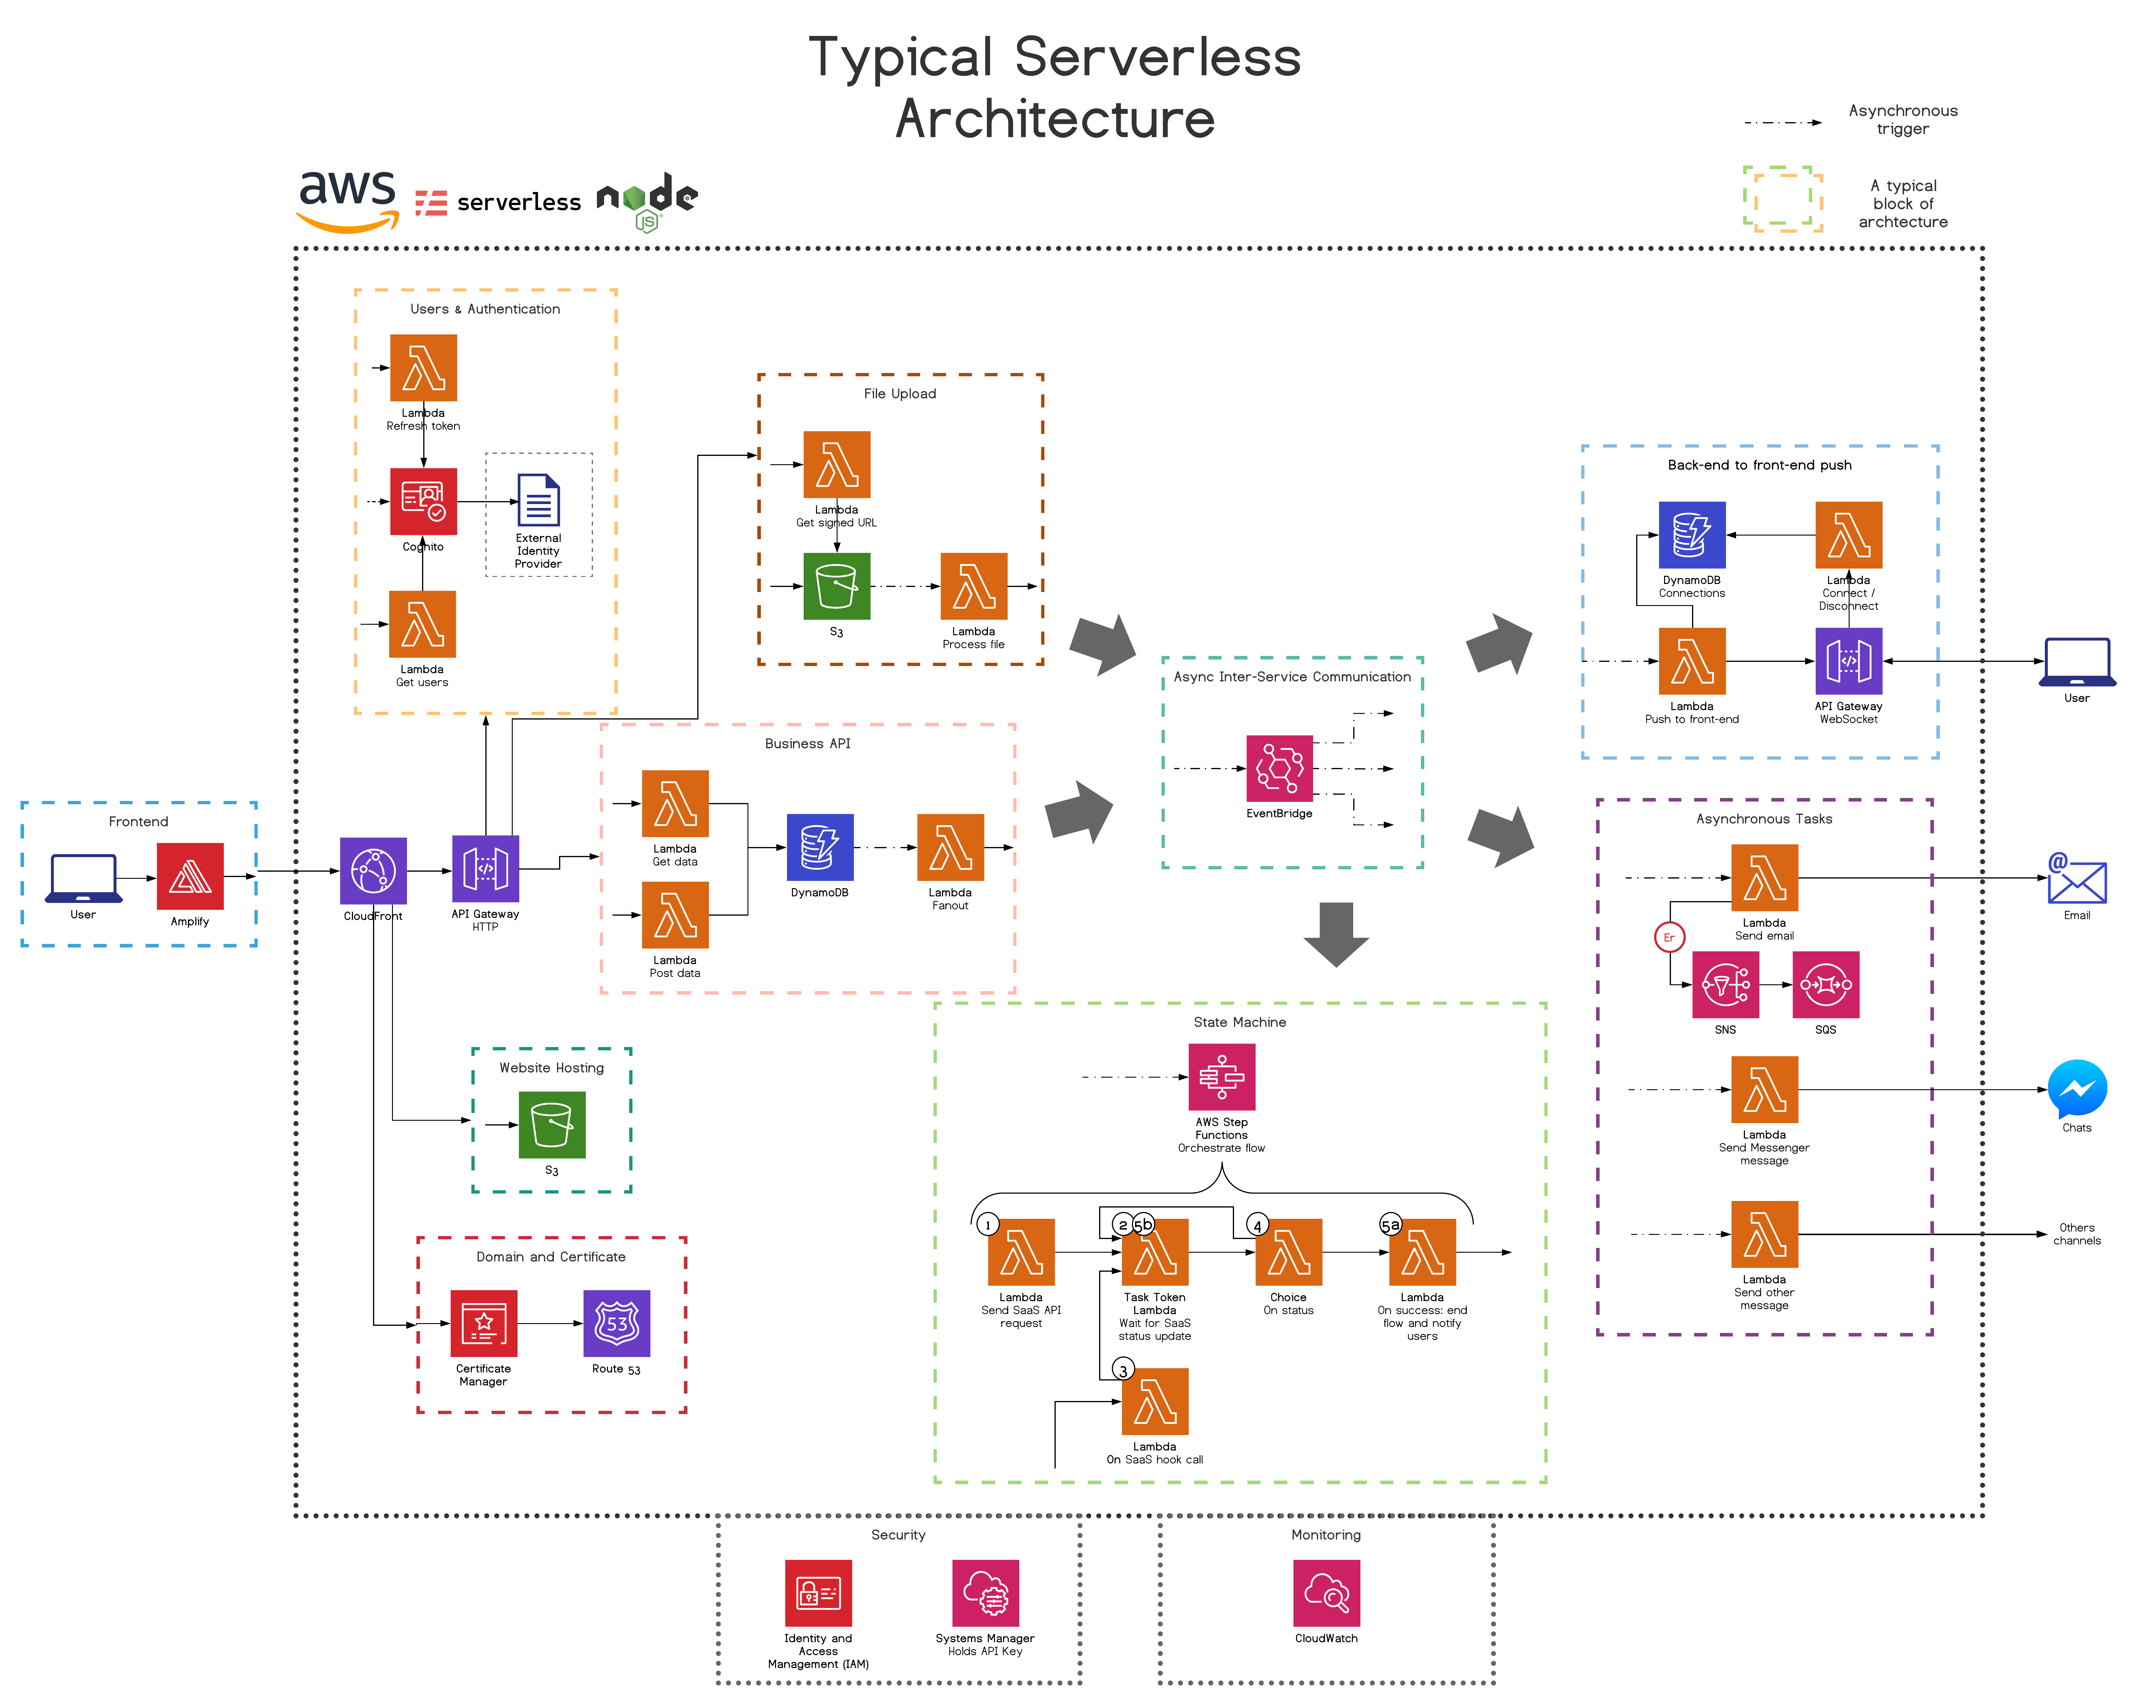 What a typical 100% Serverless Architecture looks like in AWS!